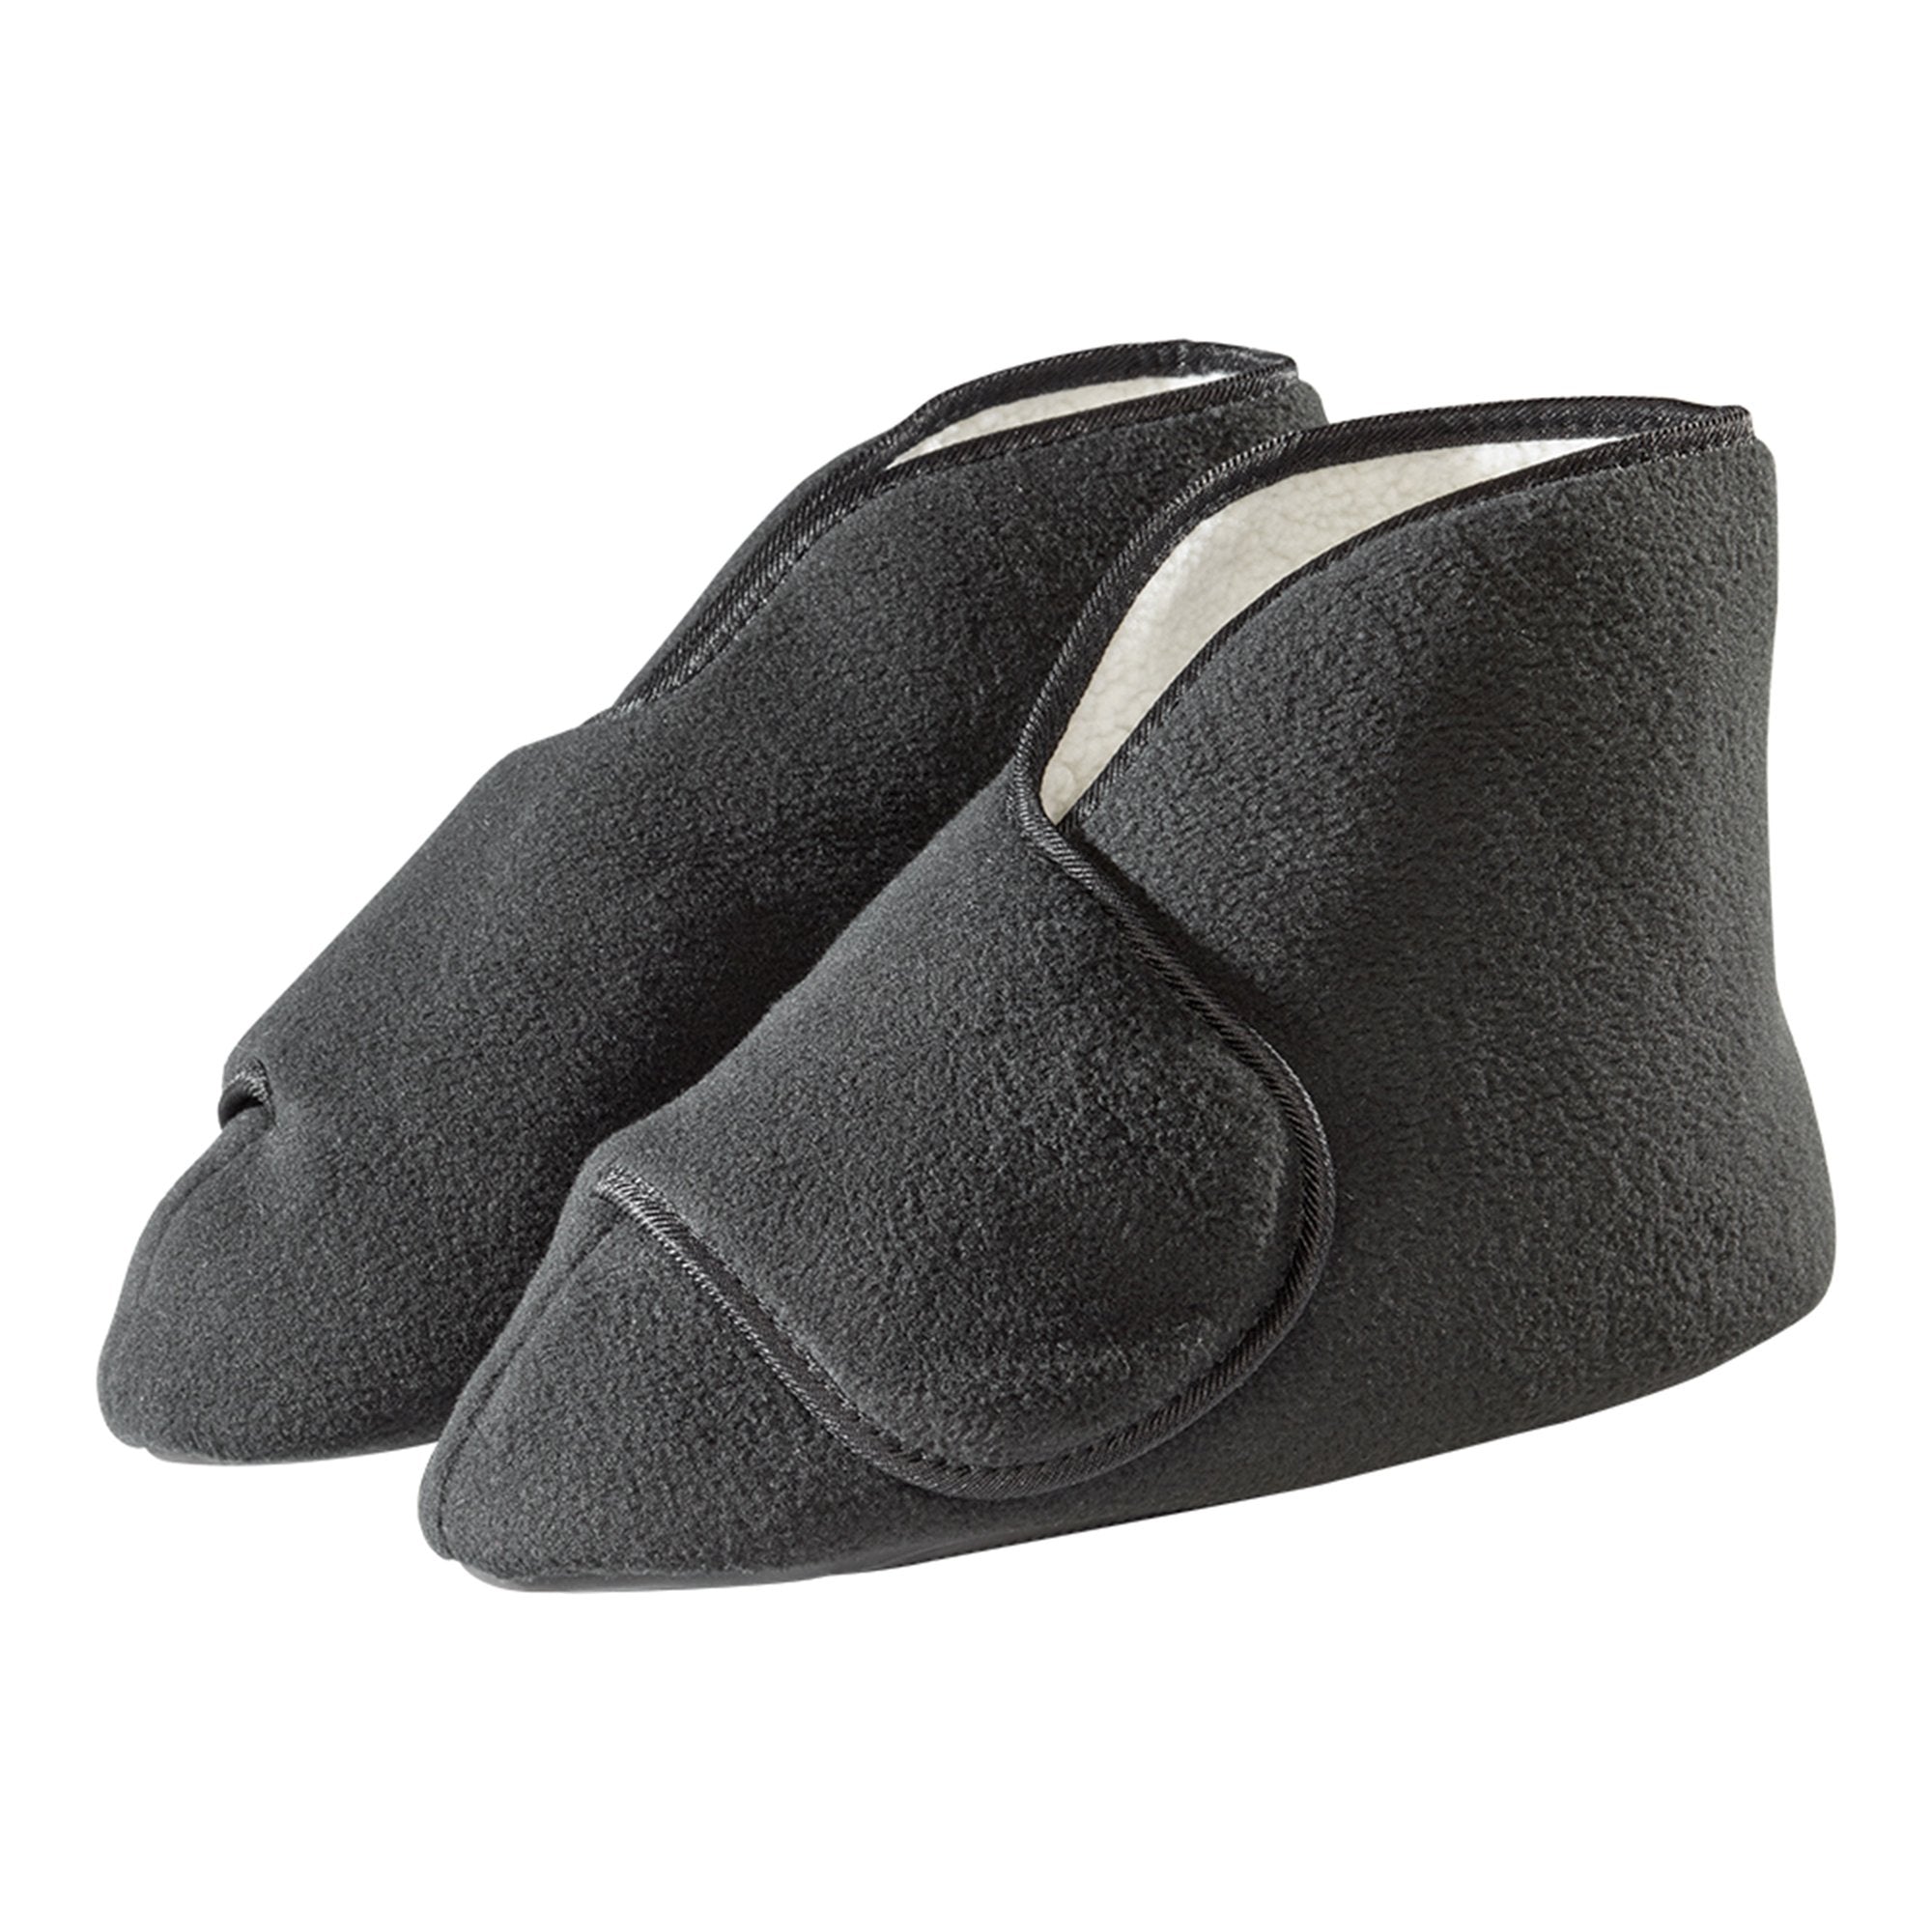 Diabetic Bootie Slippers Silverts X-Large / X-Wide Black Ankle High